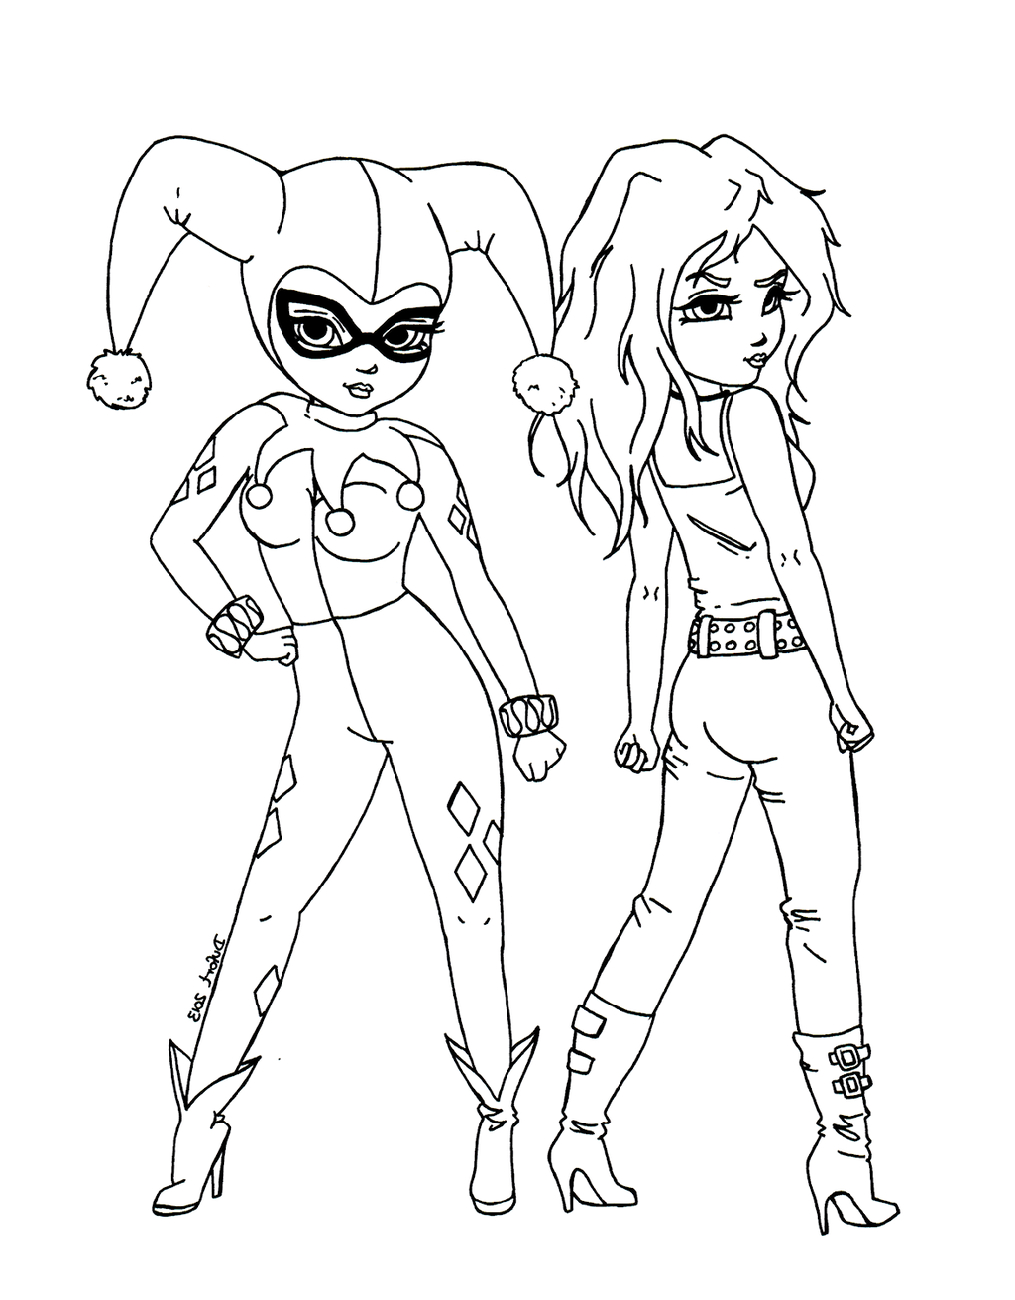 Harley Quinn Coloring Pages Free | Educative Printable dedans Coloriage Harley Quinn,